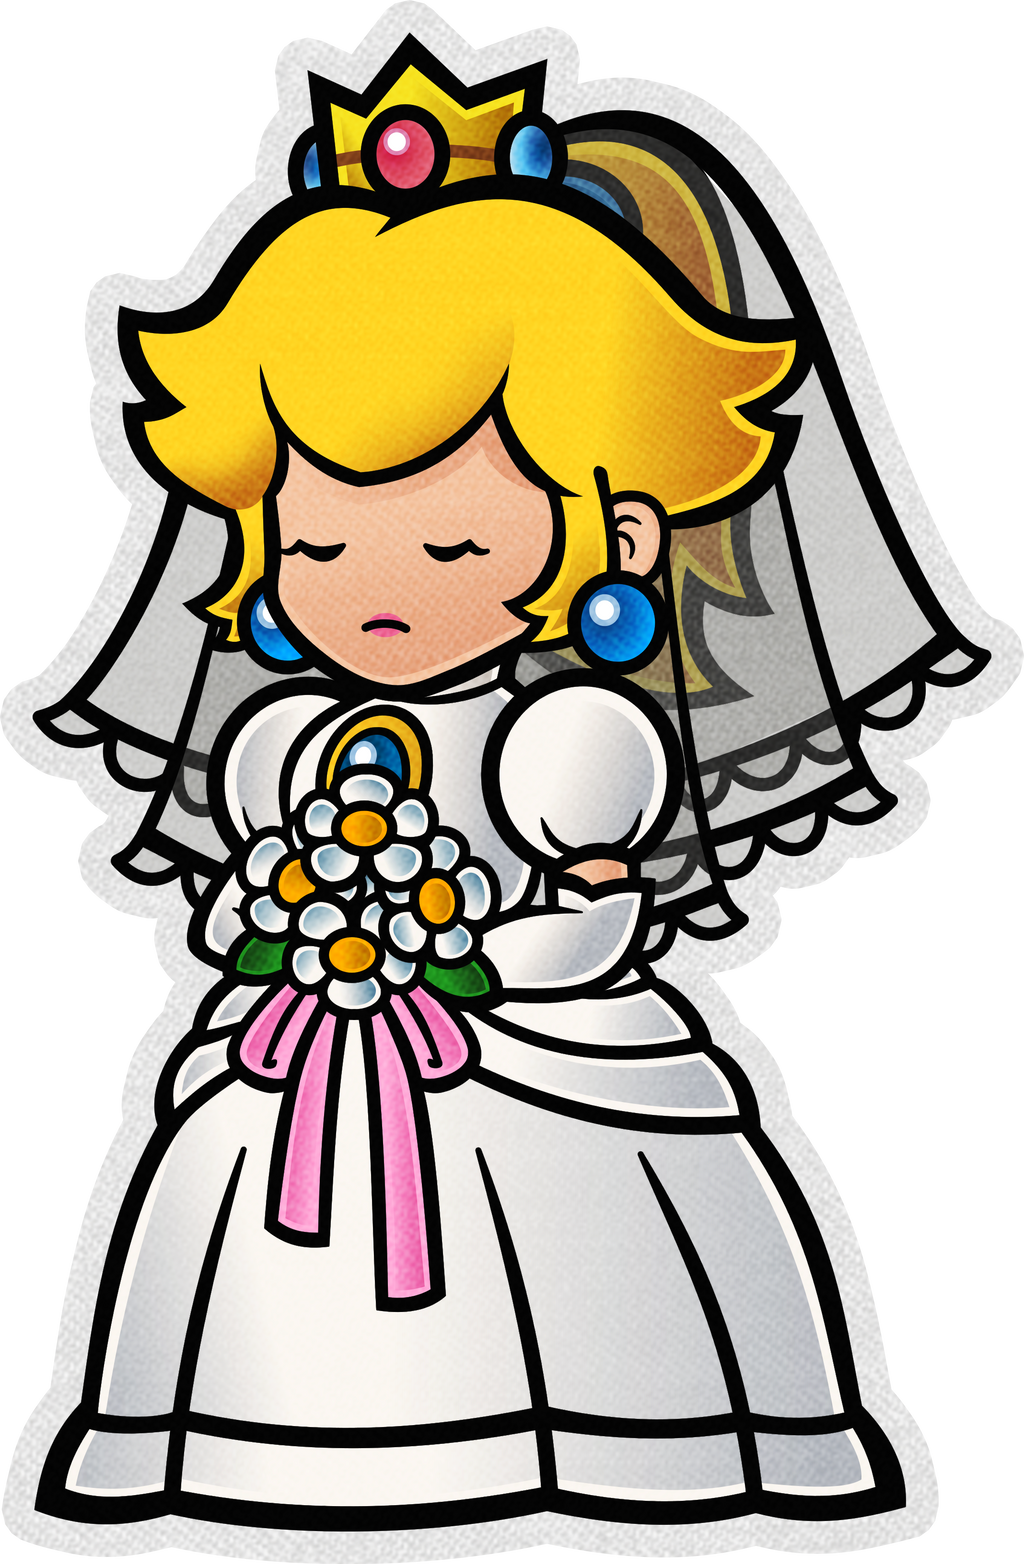 wedding_peach__modern___super_paper_mario_by_fawfulthegreat64-dbzcckw.png